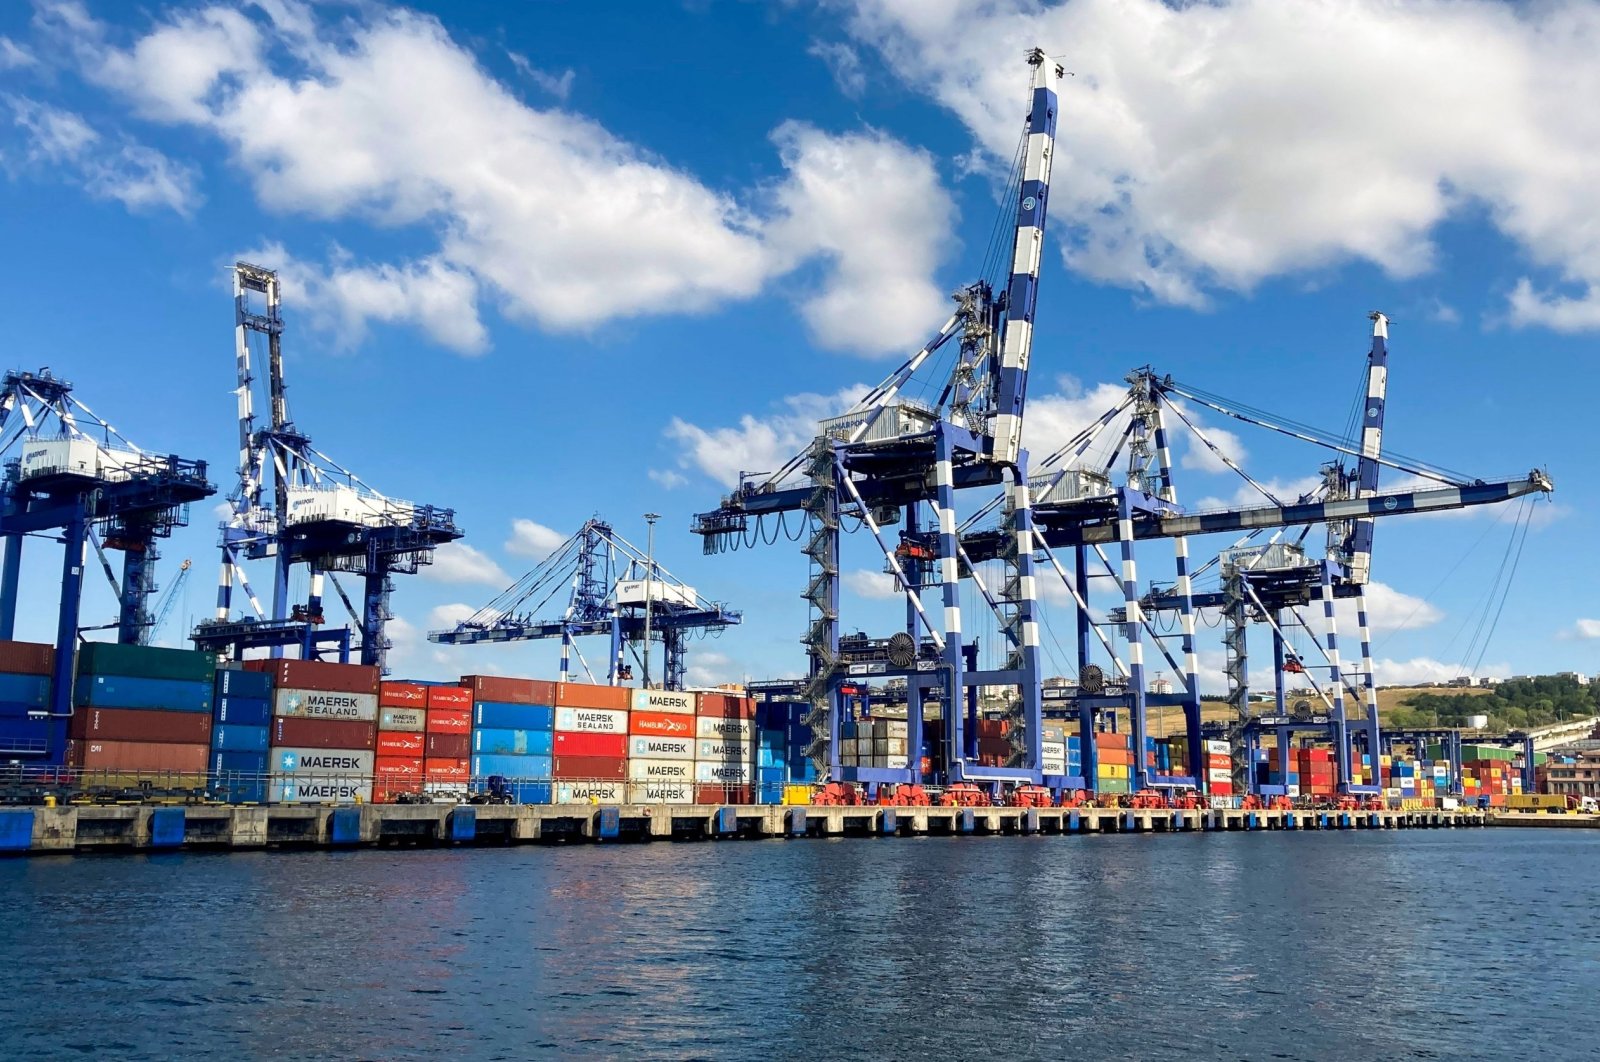 Containers carrying traded goods wait at the Port of Ambarlı, Istanbul, Türkiye, July 17, 2020. (Shutterstock Photo)